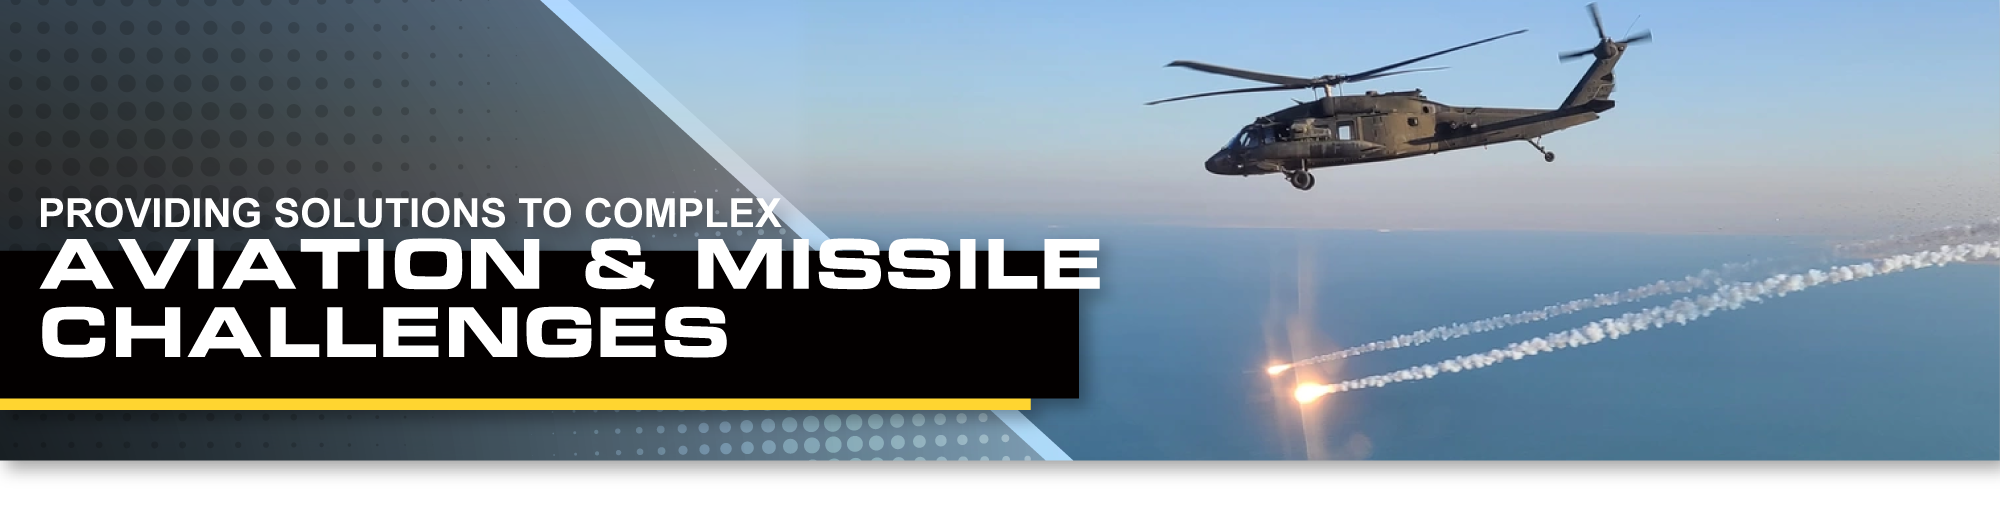 DEVCOM AvMC, providing solutions to complex aviation and missile challenges